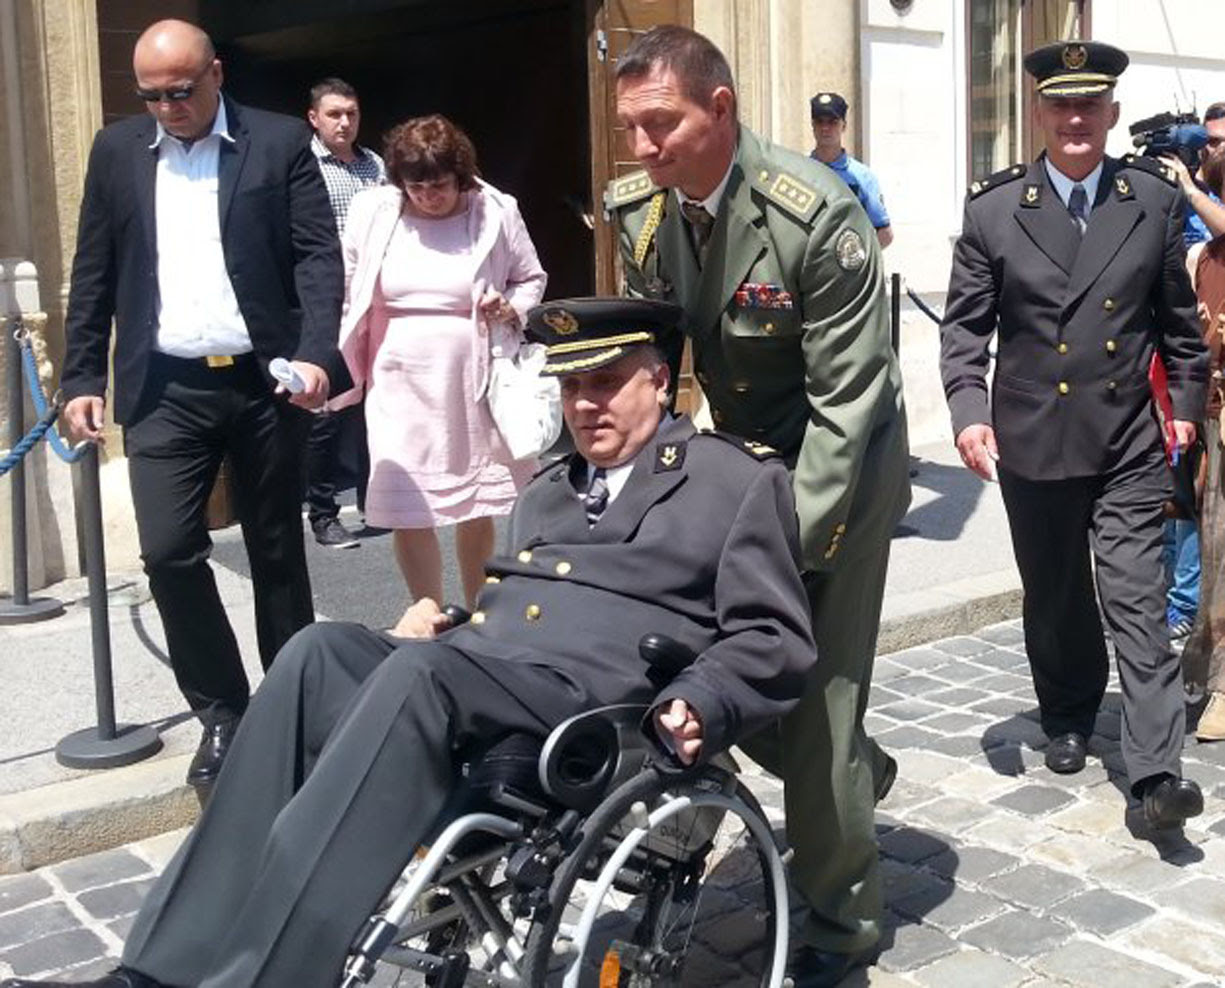 Croatian veterans Djuro Glogoski (in wheelchair) and Josip Klemm (pushing the wheelchair) head to meet with Croatia's Prime Minister for the first time since the veterans' protest commenced more than 200 days ago Photo: Index/Hina June 2015